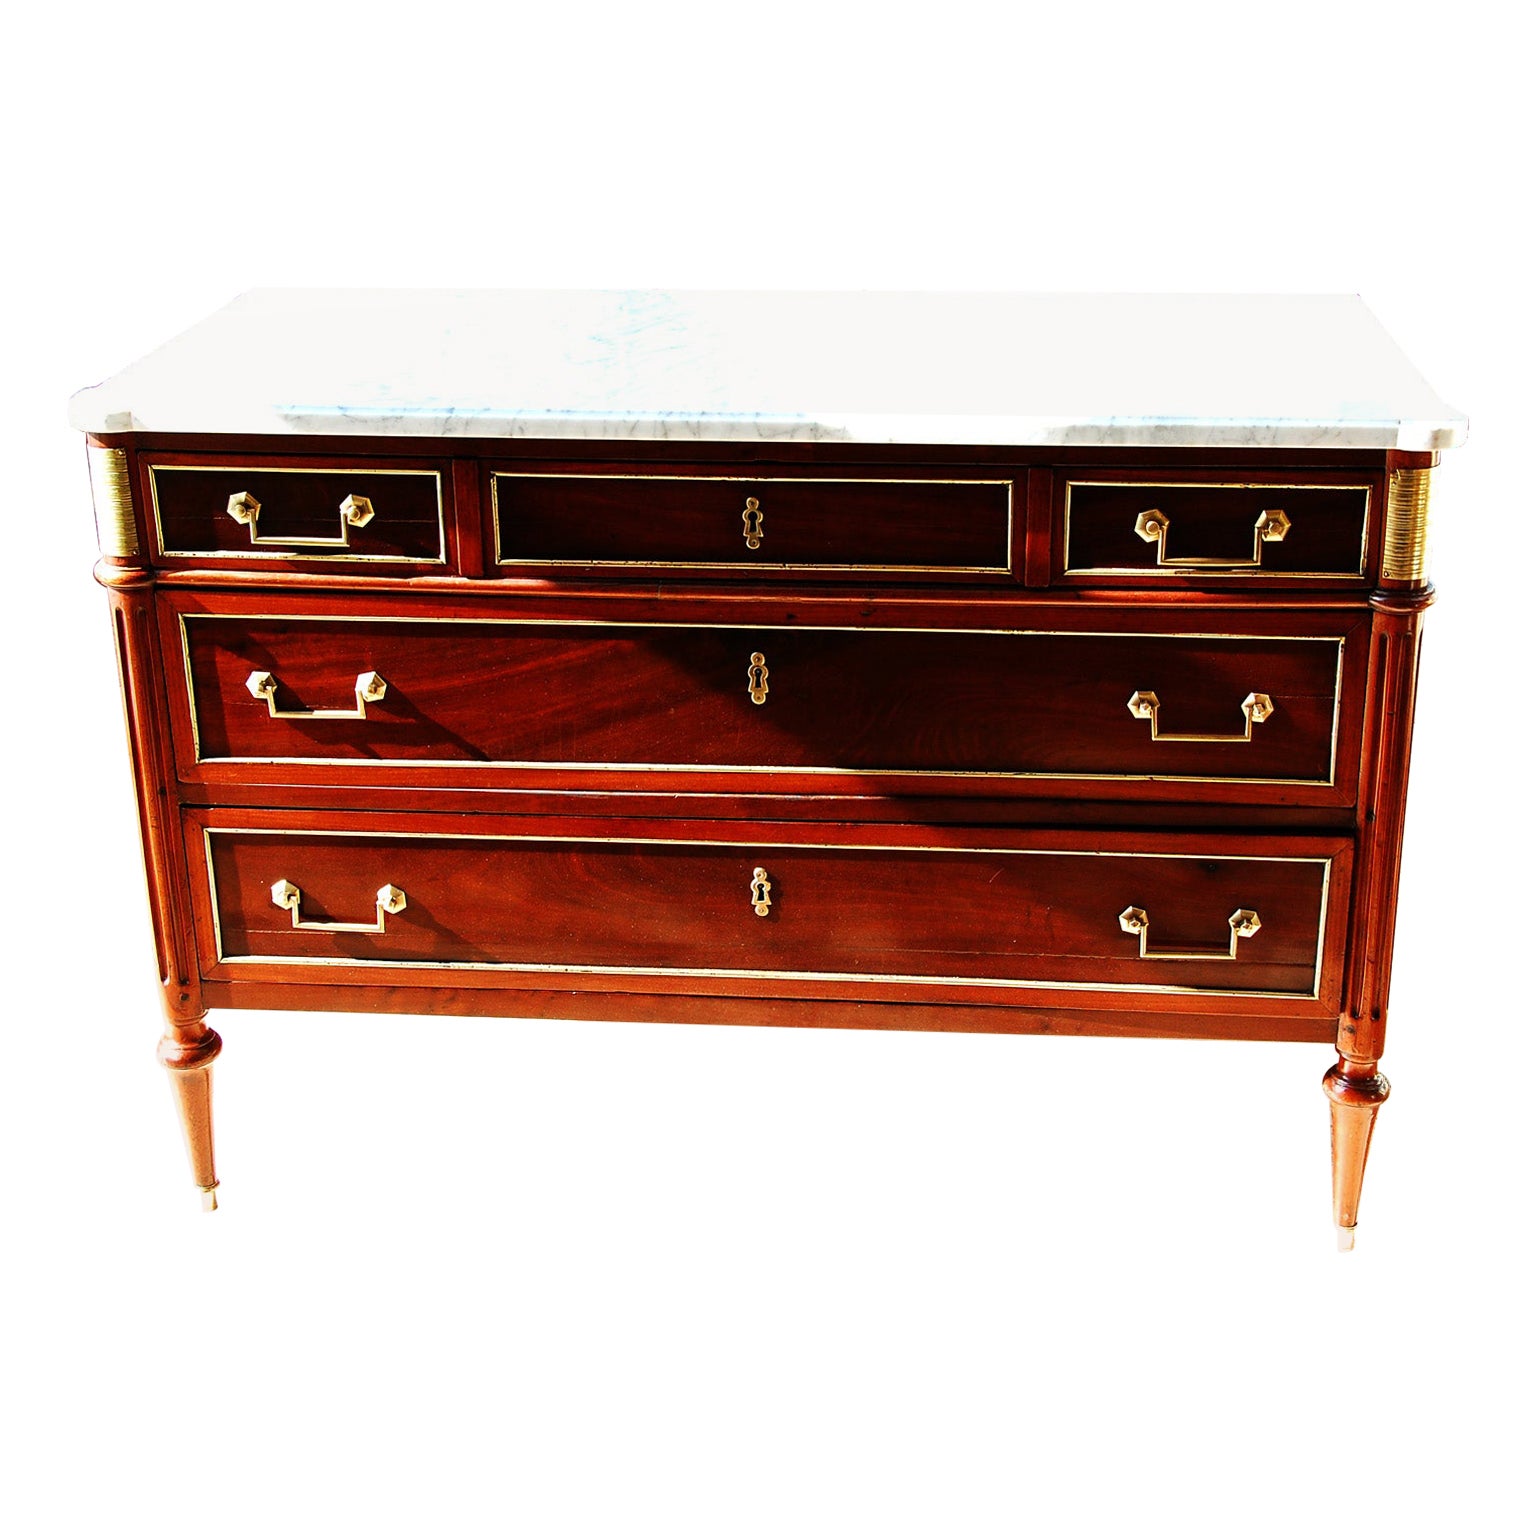 French Louis XVI Period Mahogany Three Drawer Commode or Chest with Marble Top